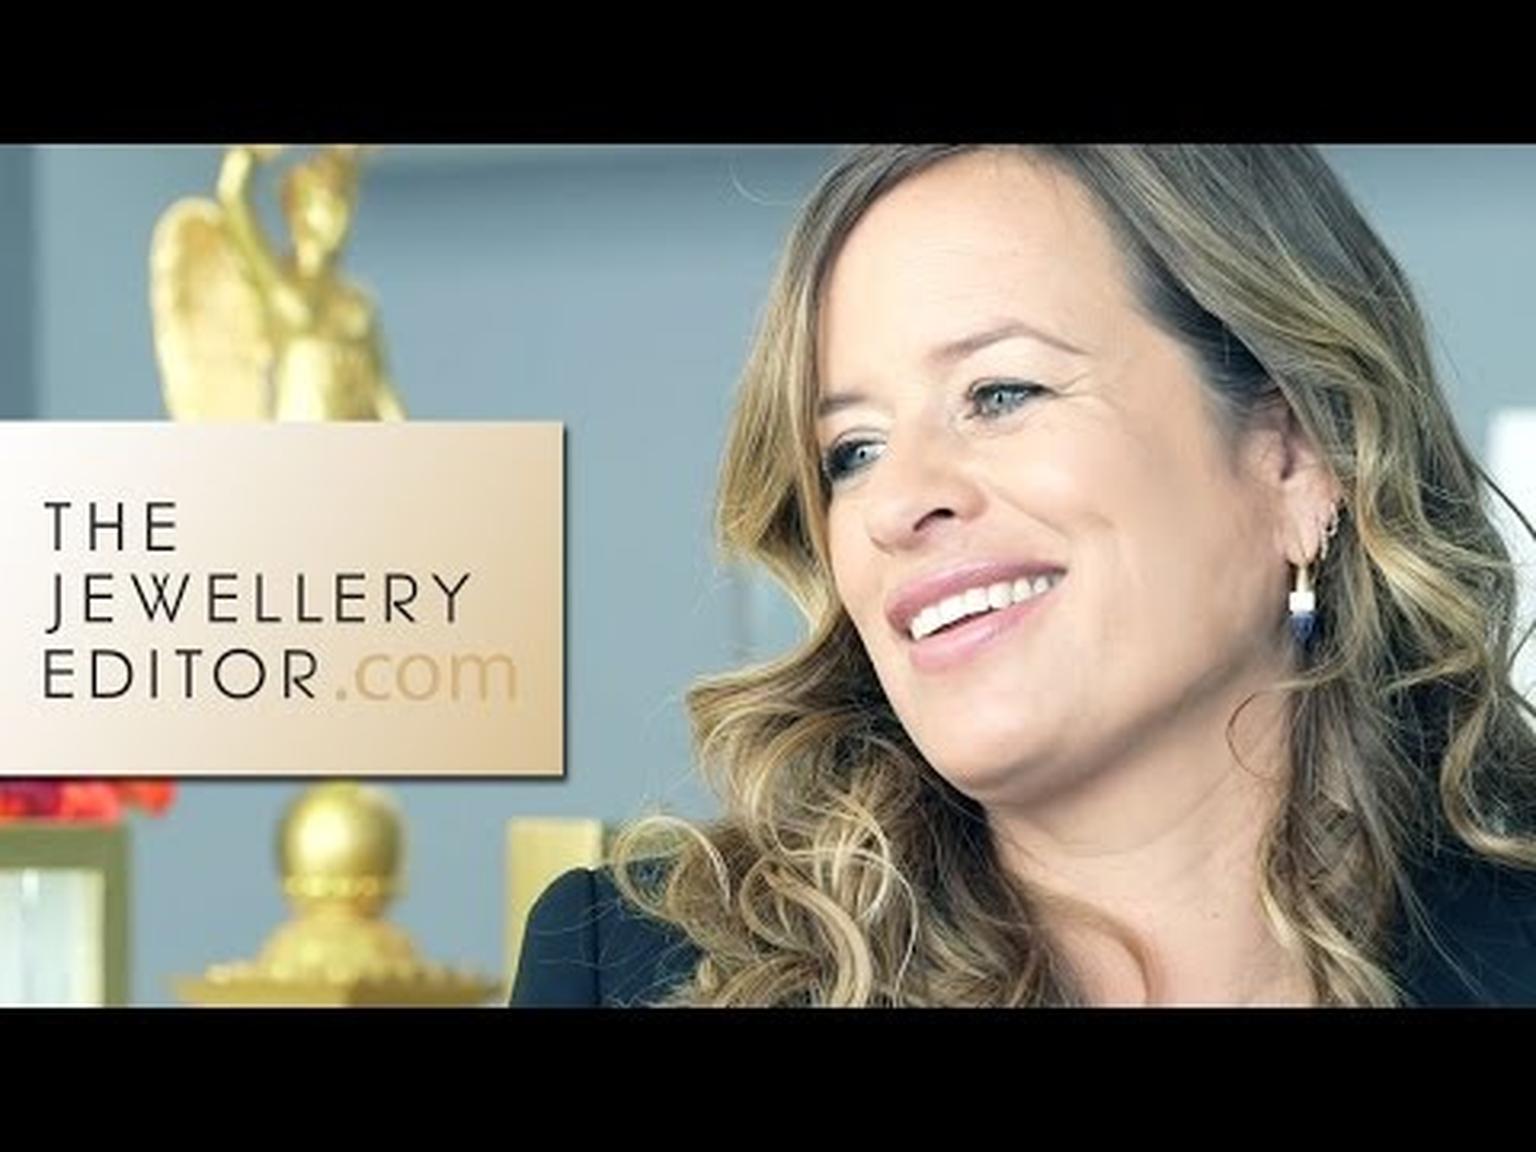 Jade Jagger presents her Never Ending jewellery collection launched exclusively with 1st dibs